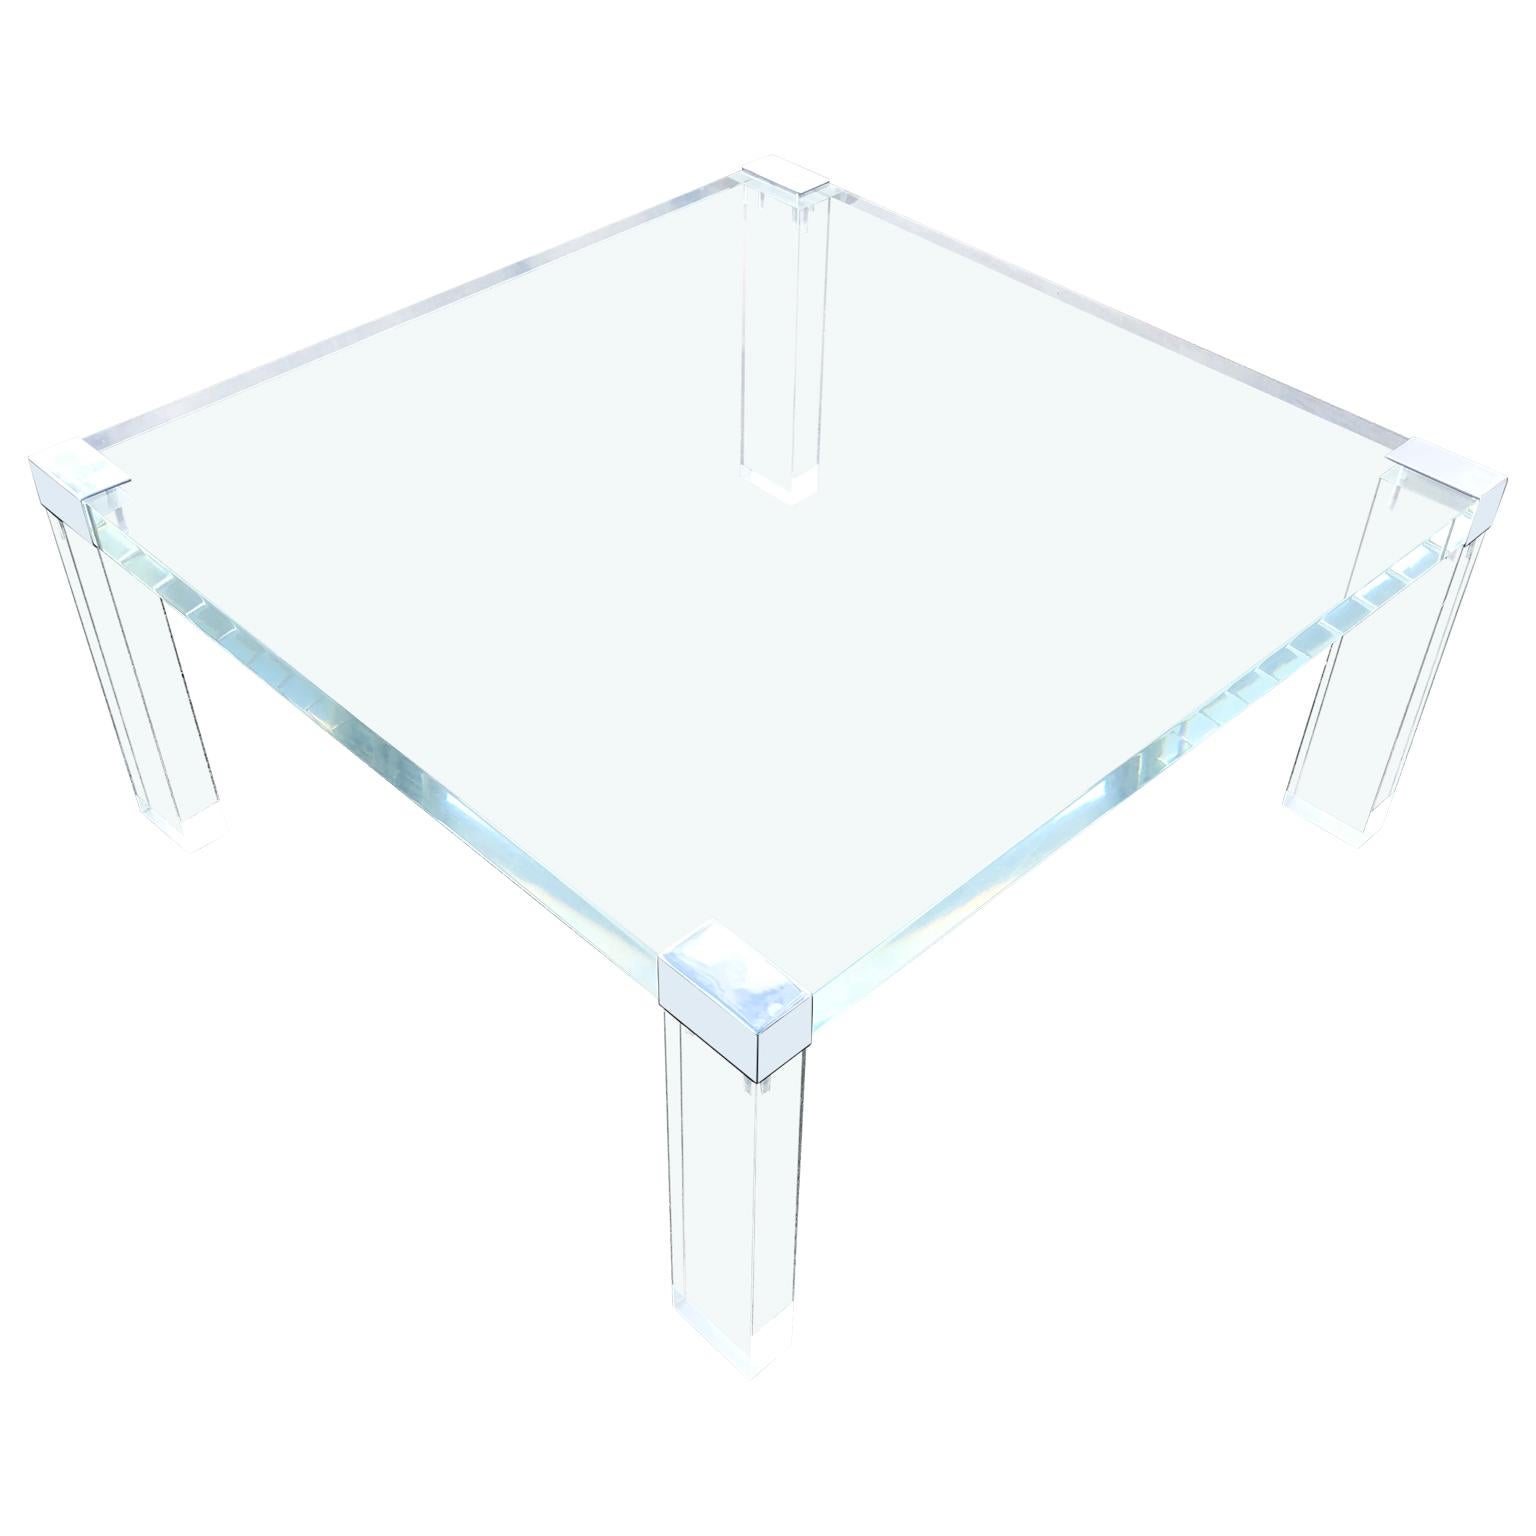 Italian Square Lucite And Chrome Coffee Or Cocktail Table (Handgefertigt)